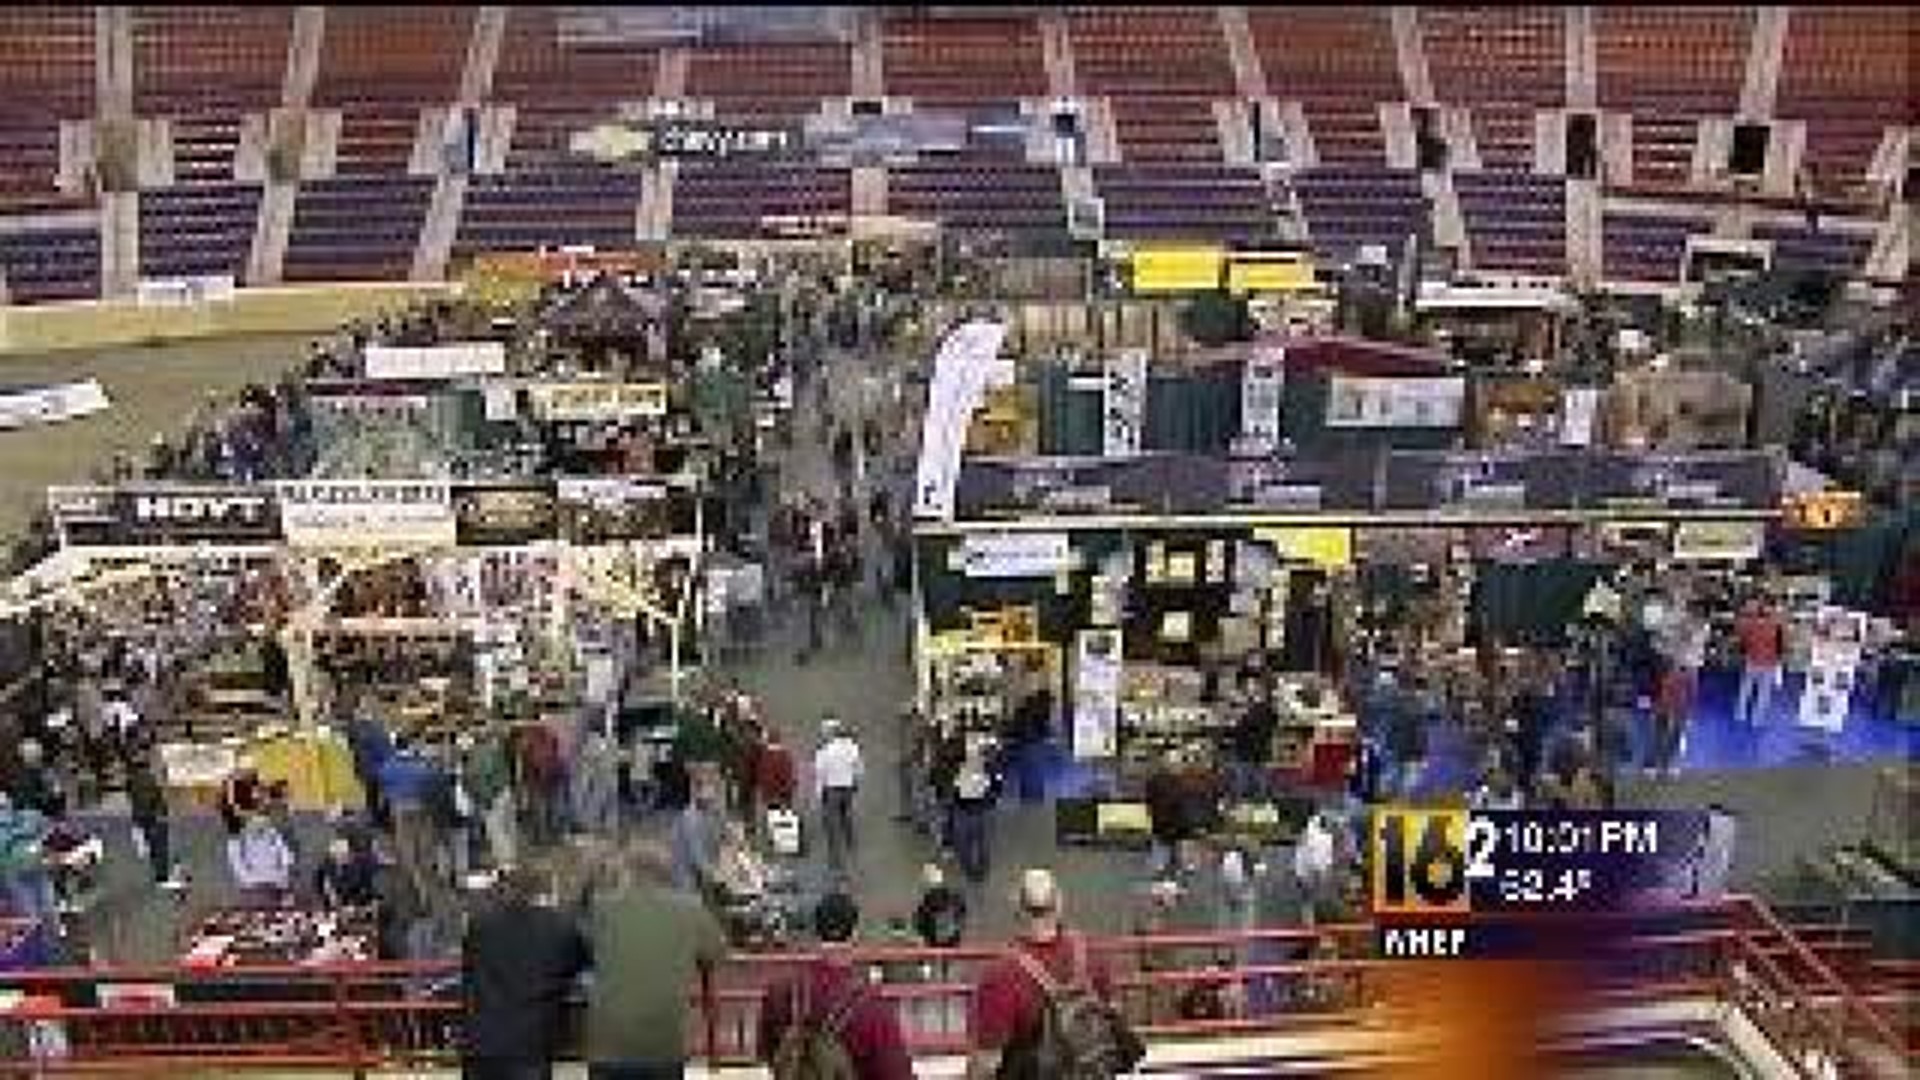 NRA “No Sales Policy” At Gun Show In Harrisburg